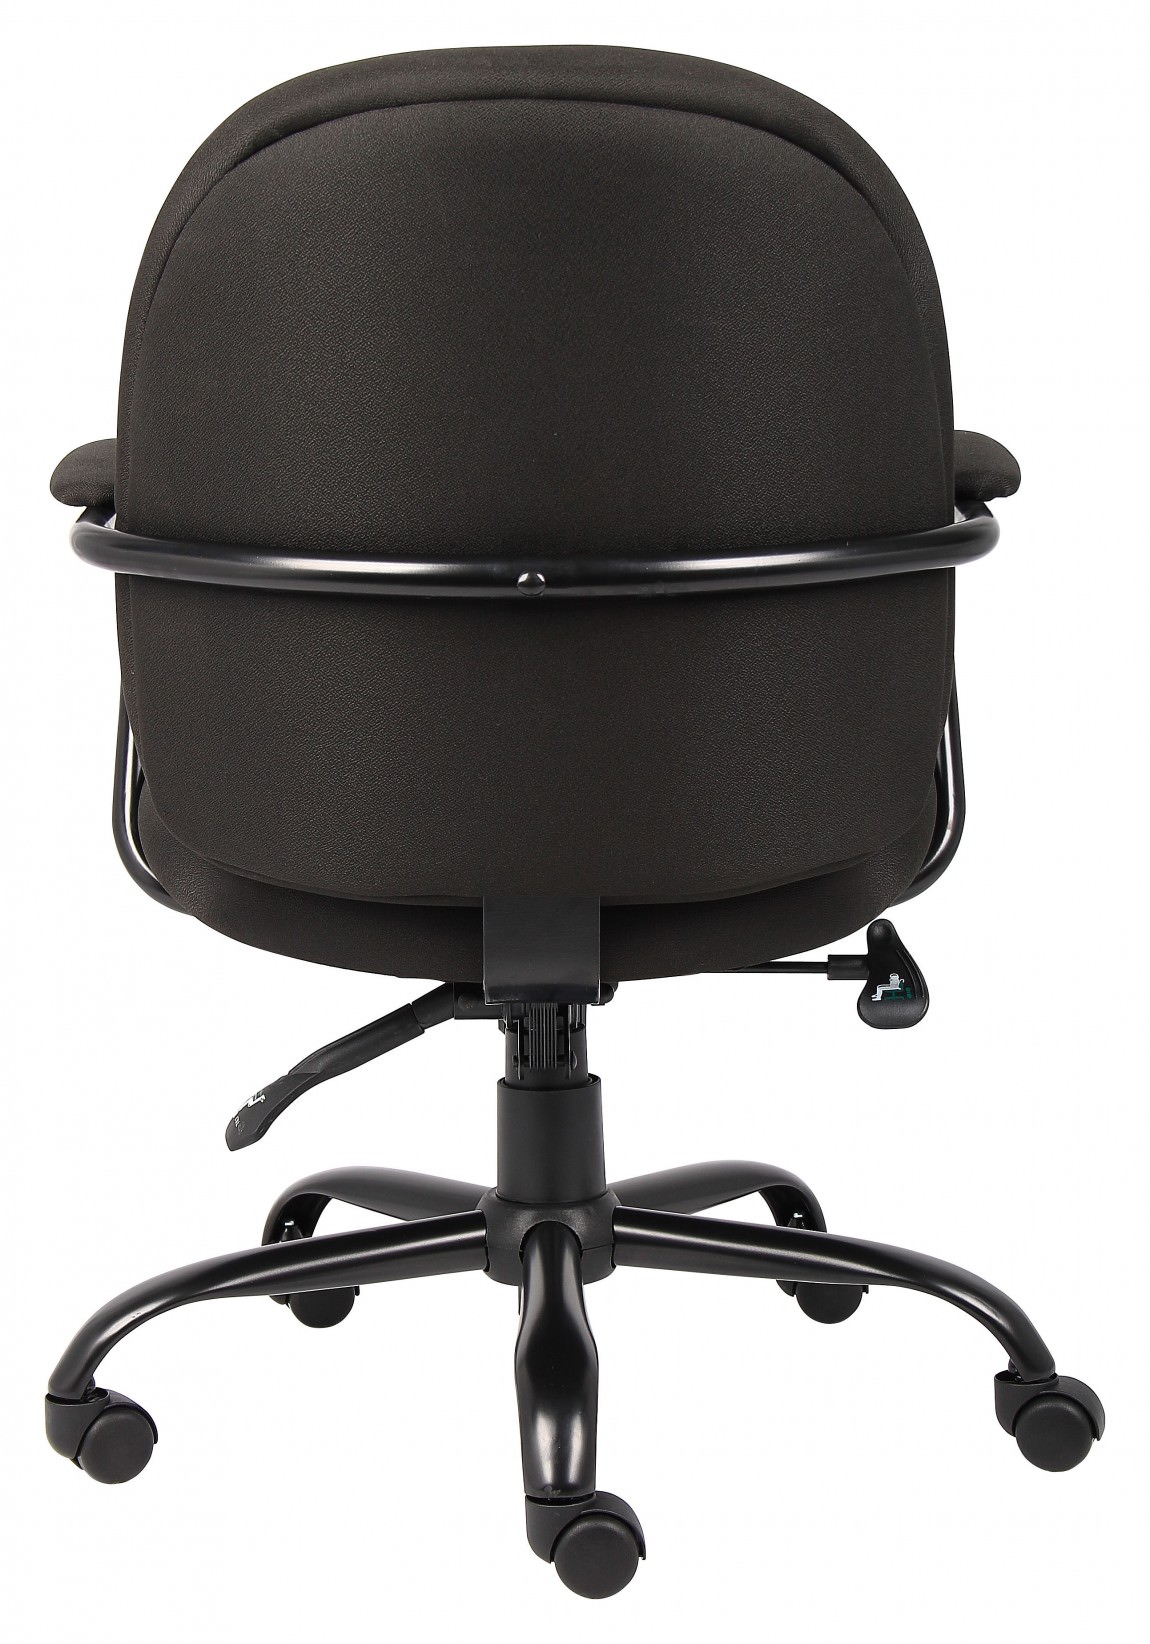 https://madisonliquidators.com/images/p/1150/27368-heavy-duty-task-chair-with-arms-3.jpg